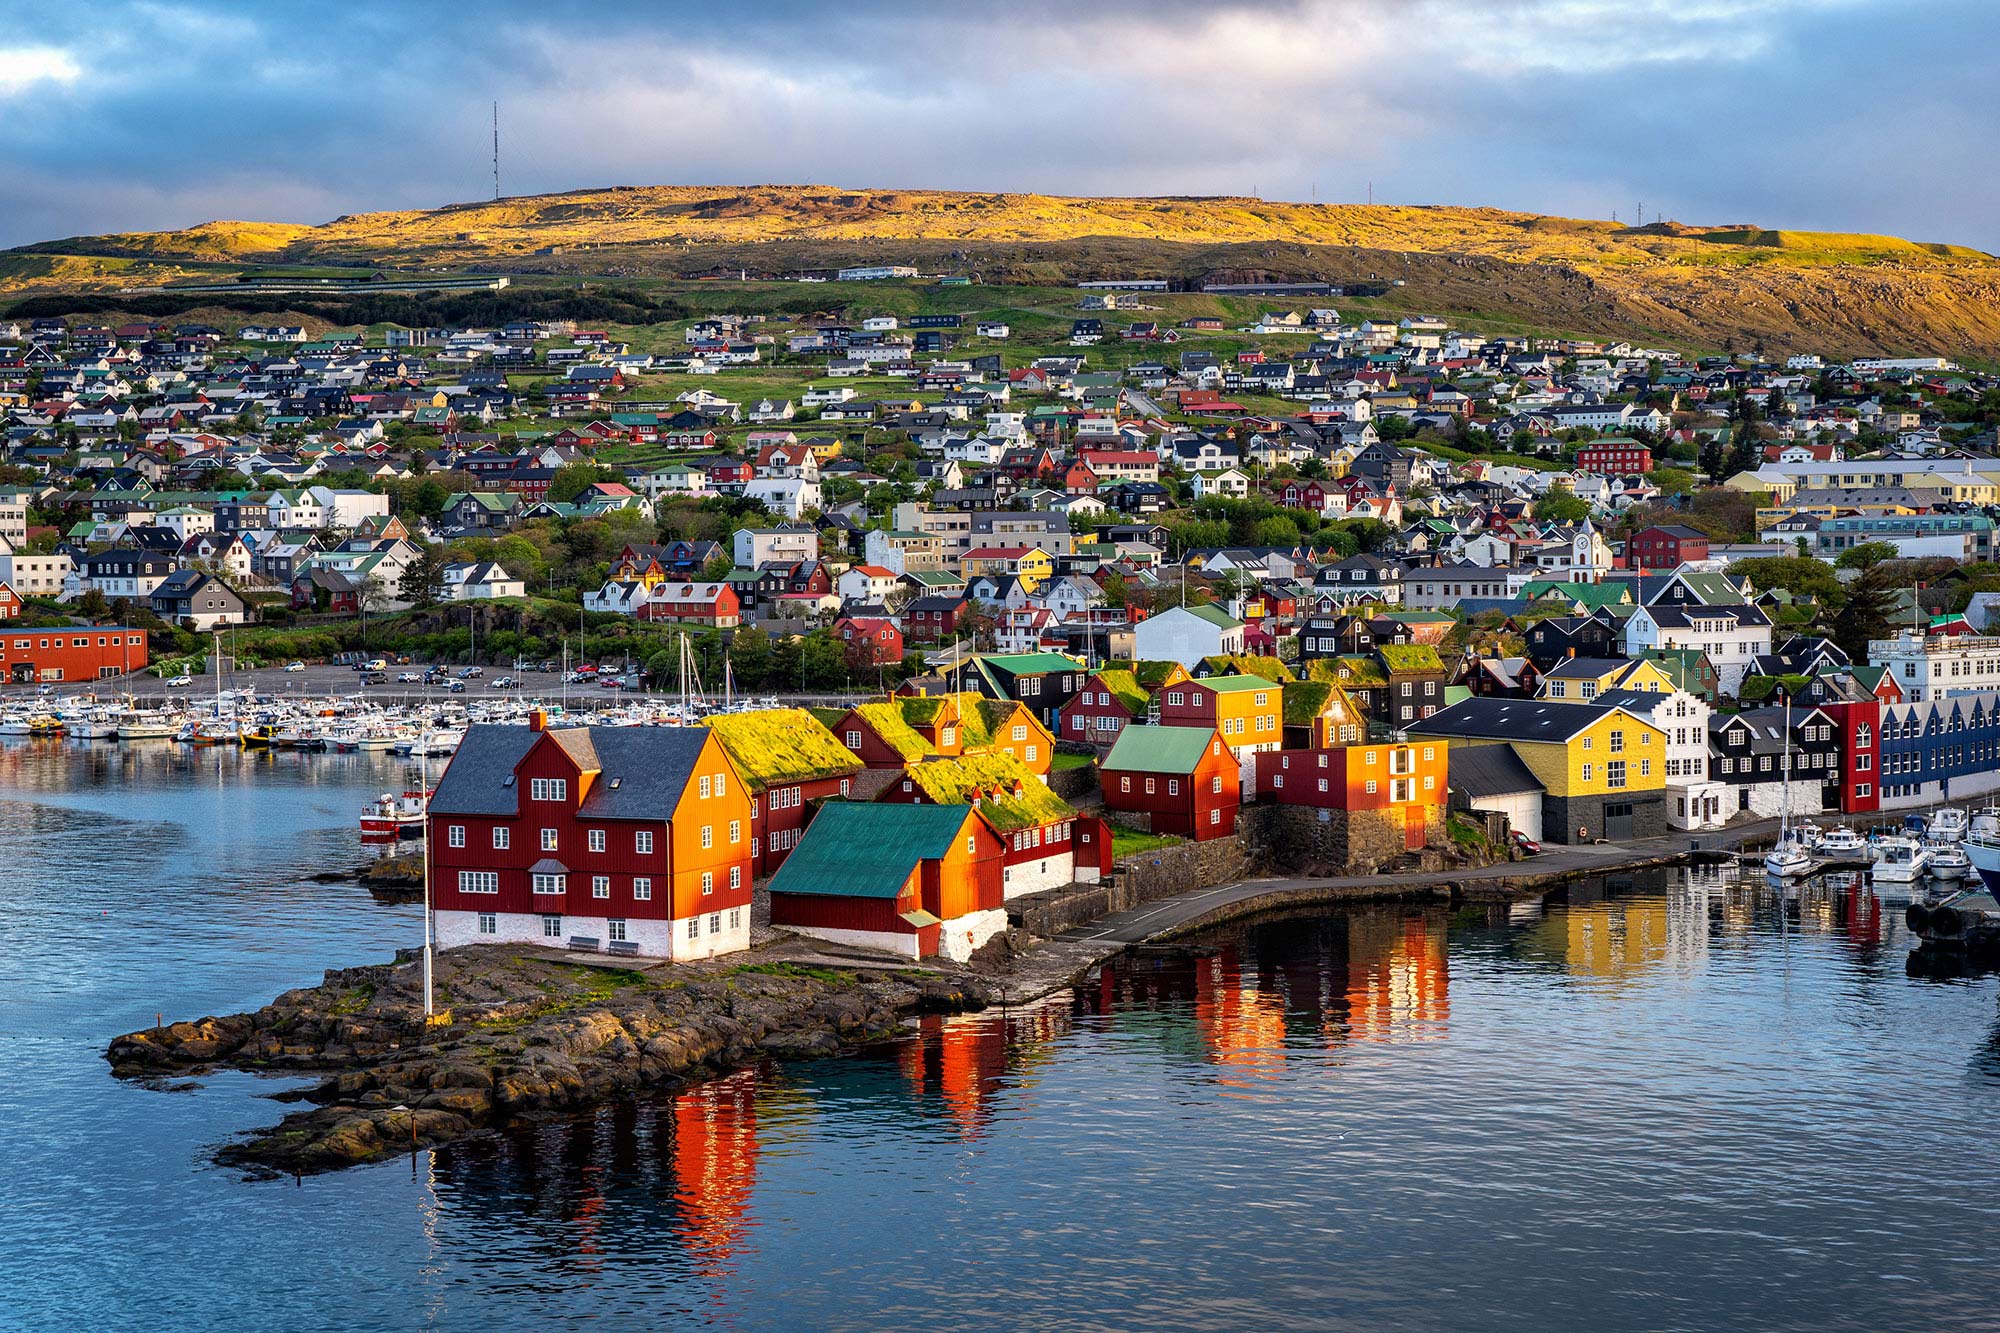 A view of Tórshavn the capital city of the Faroe Islands.